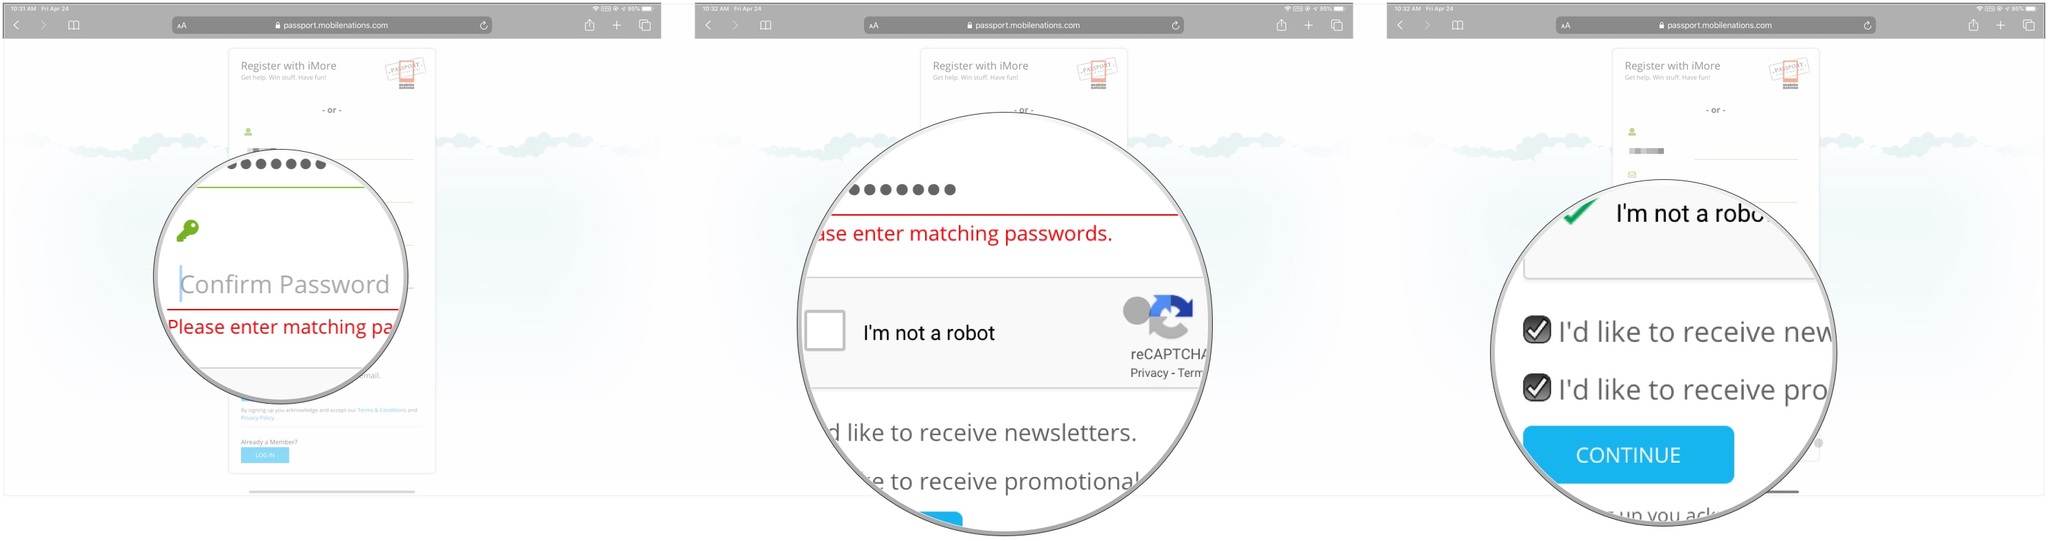 Sign up for iMore showing how to enter your password a second time to confirm it, then perform the reCAPATCHA process, then click on the checkboxes